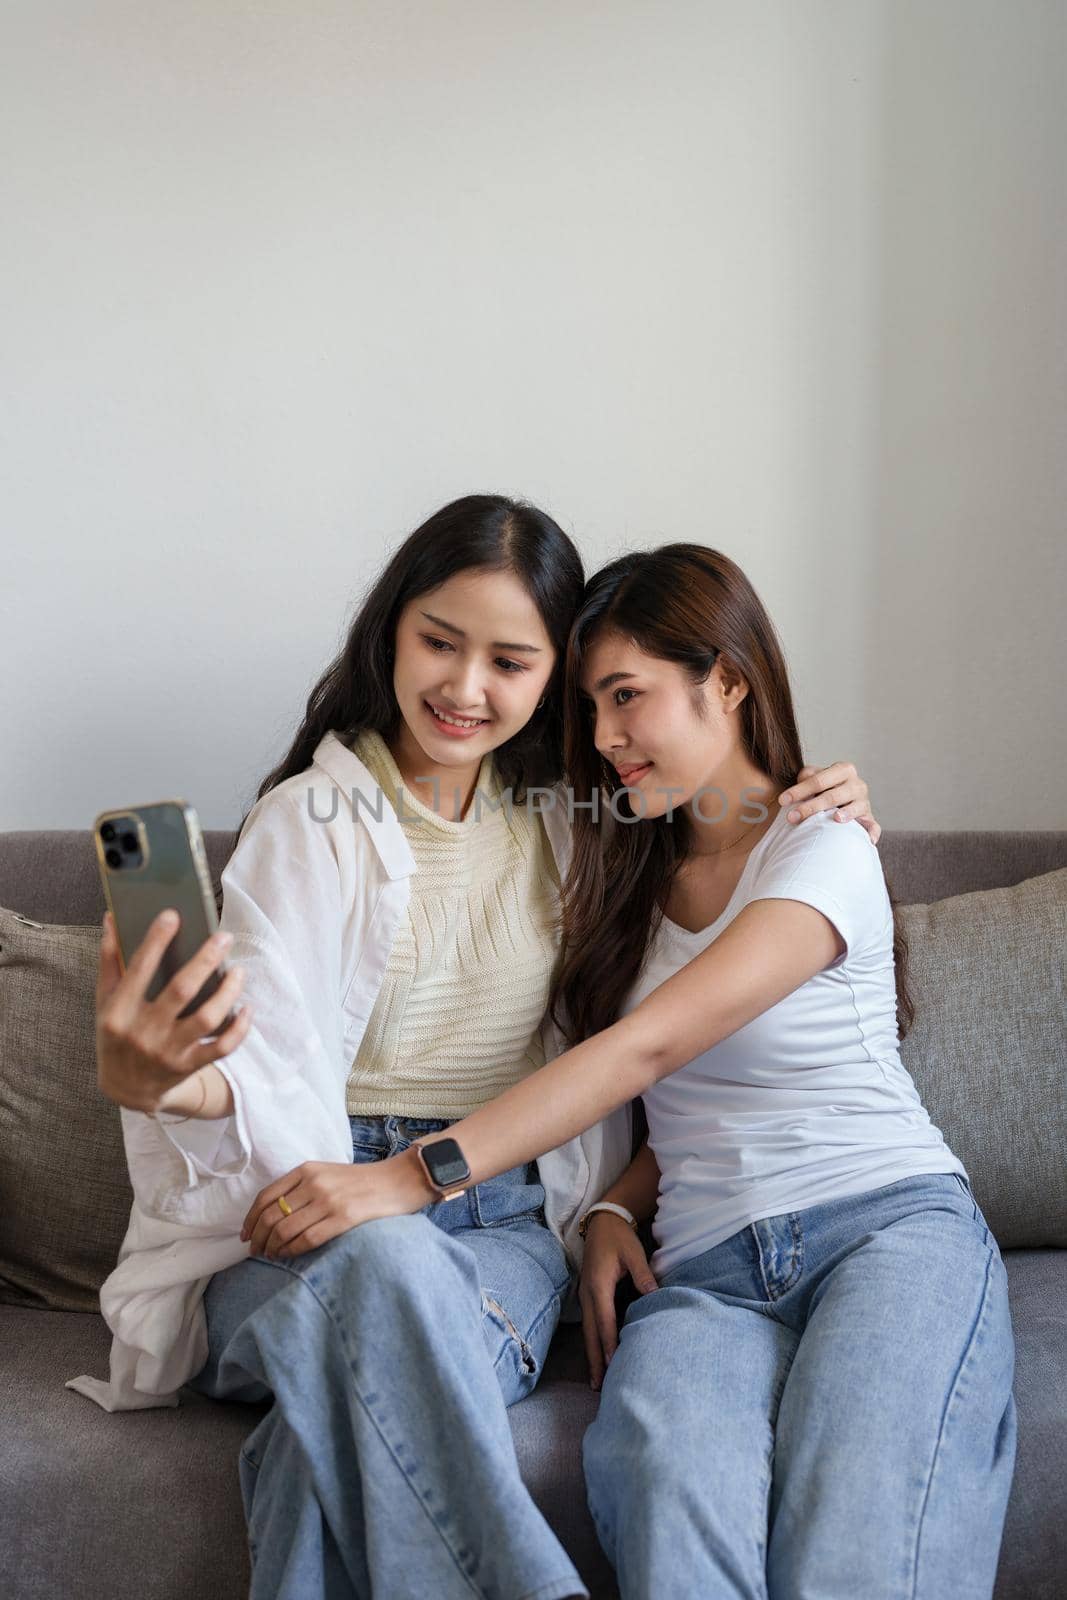 lgbtq, lgbt concept, homosexuality, portrait of two asian women enjoying together and showing love for each other while using smartphone mobile to take selfies by Manastrong